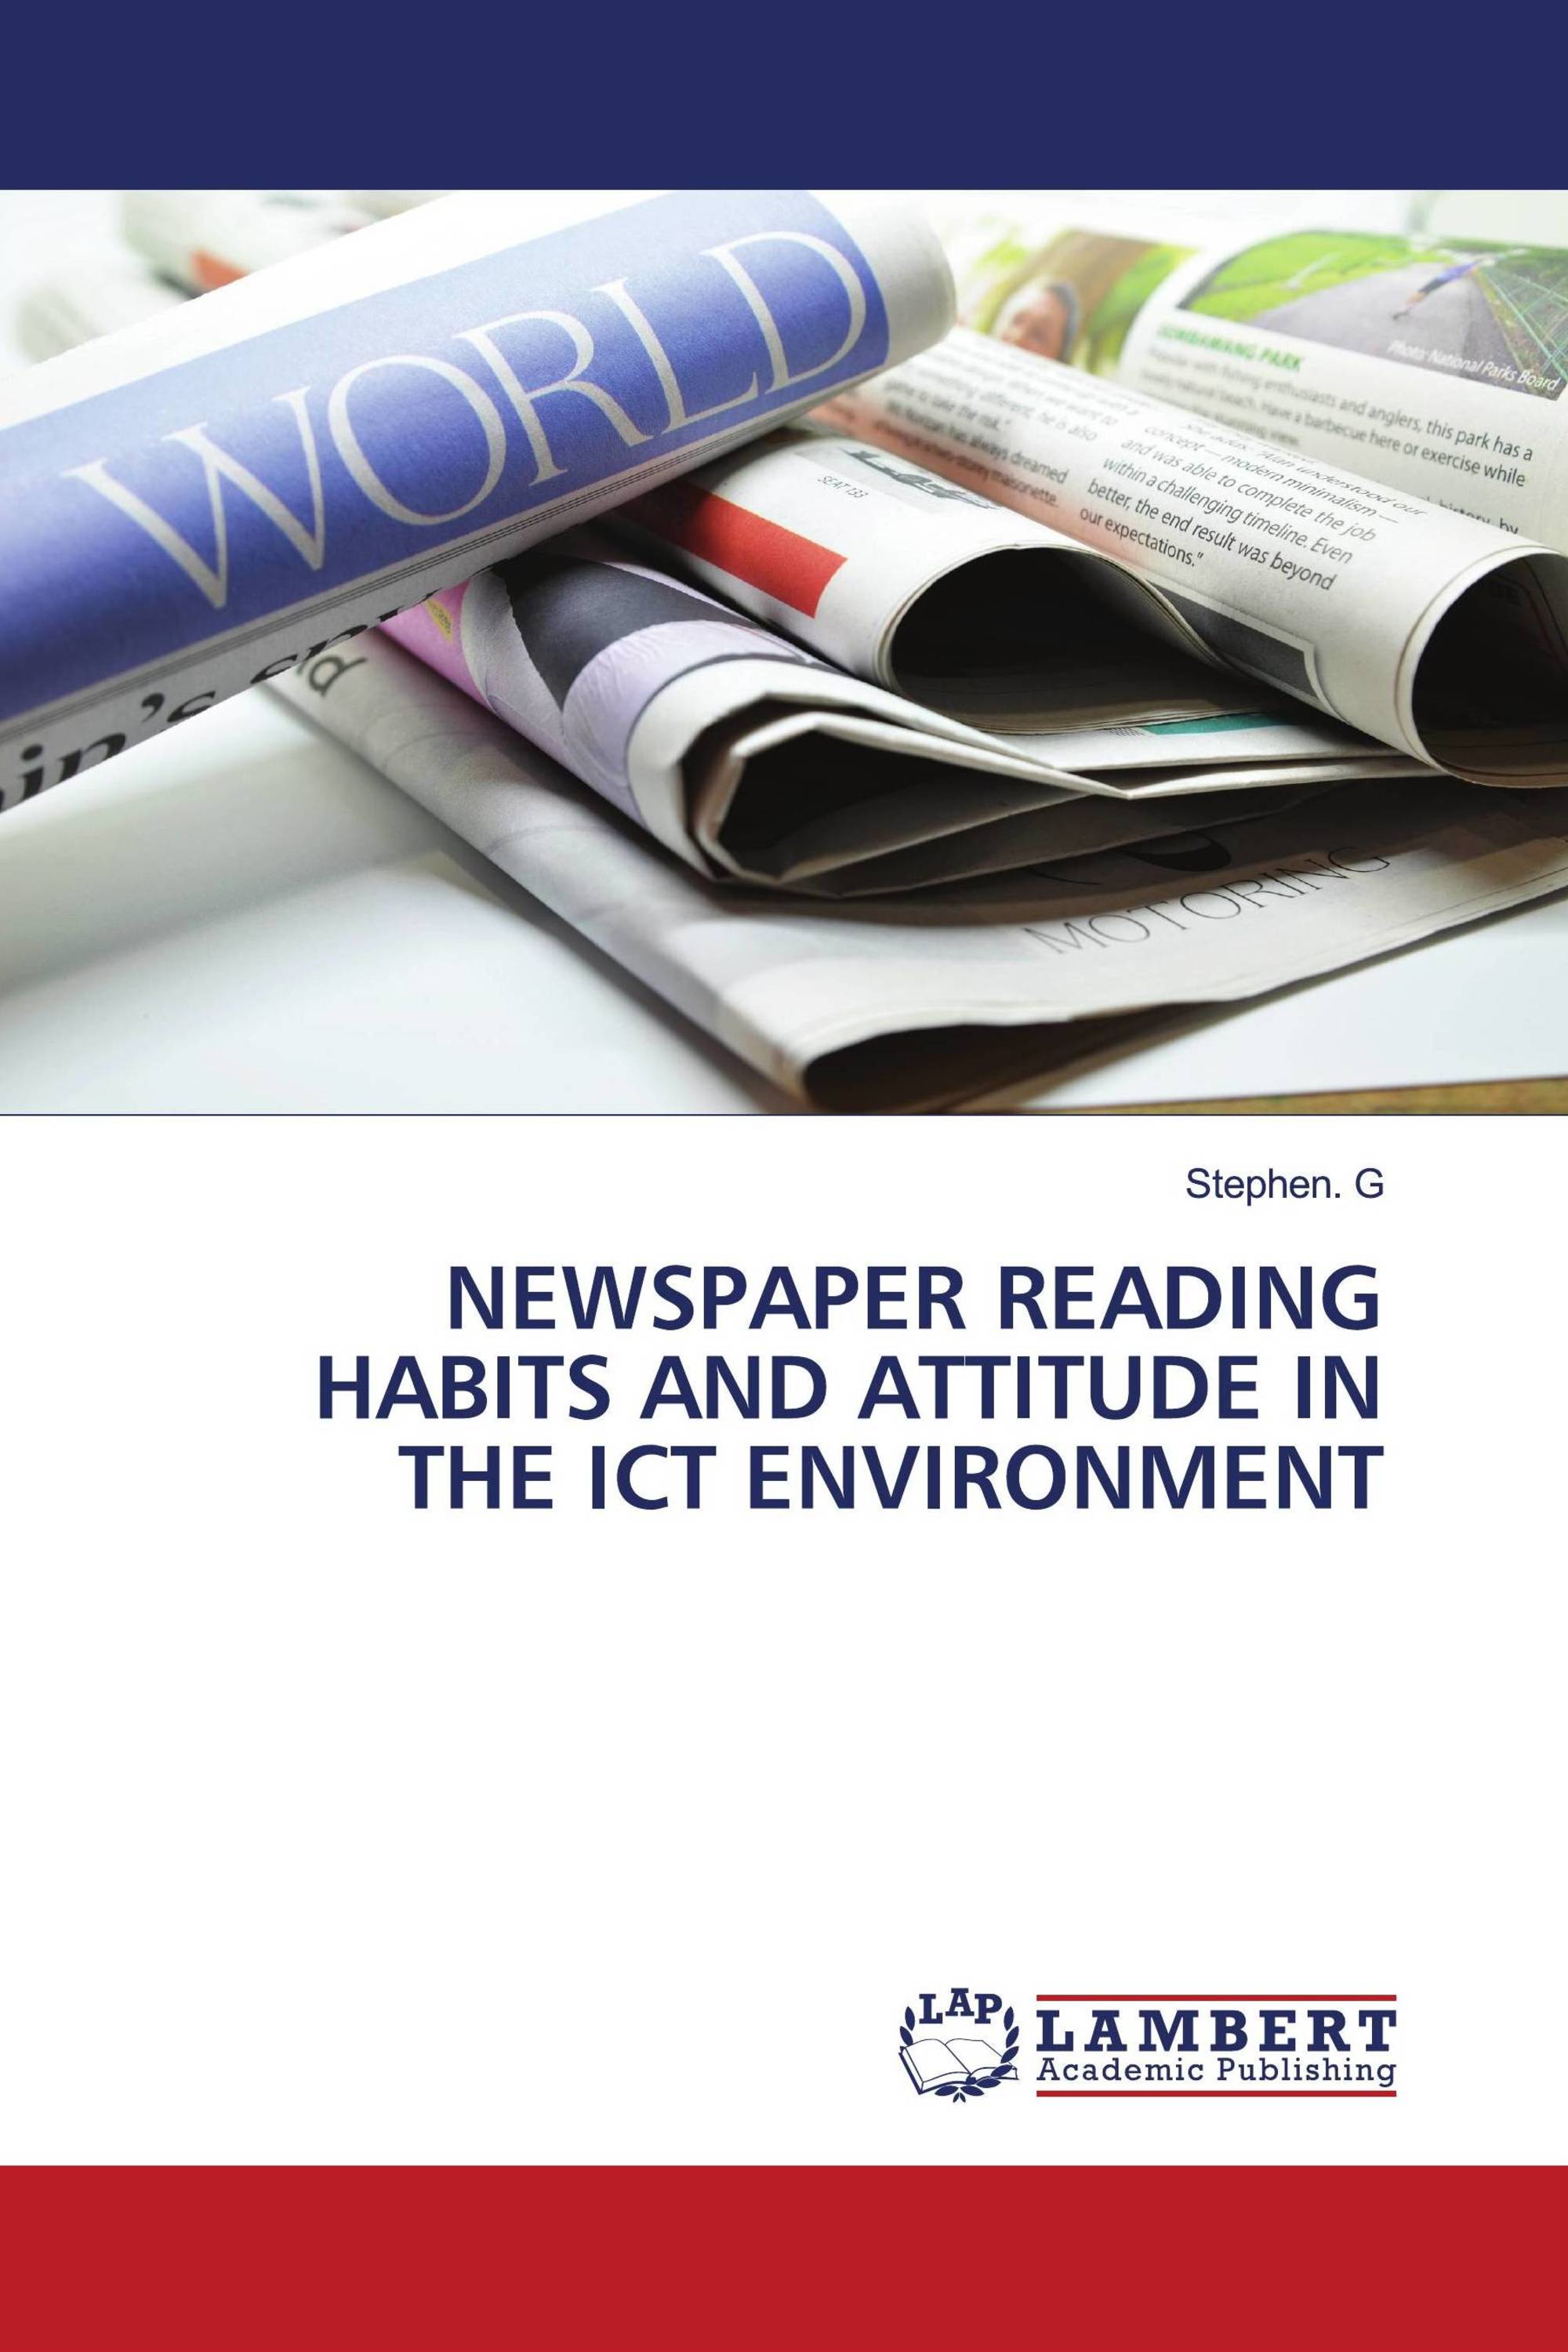 NEWSPAPER READING HABITS AND ATTITUDE IN THE ICT ENVIRONMENT